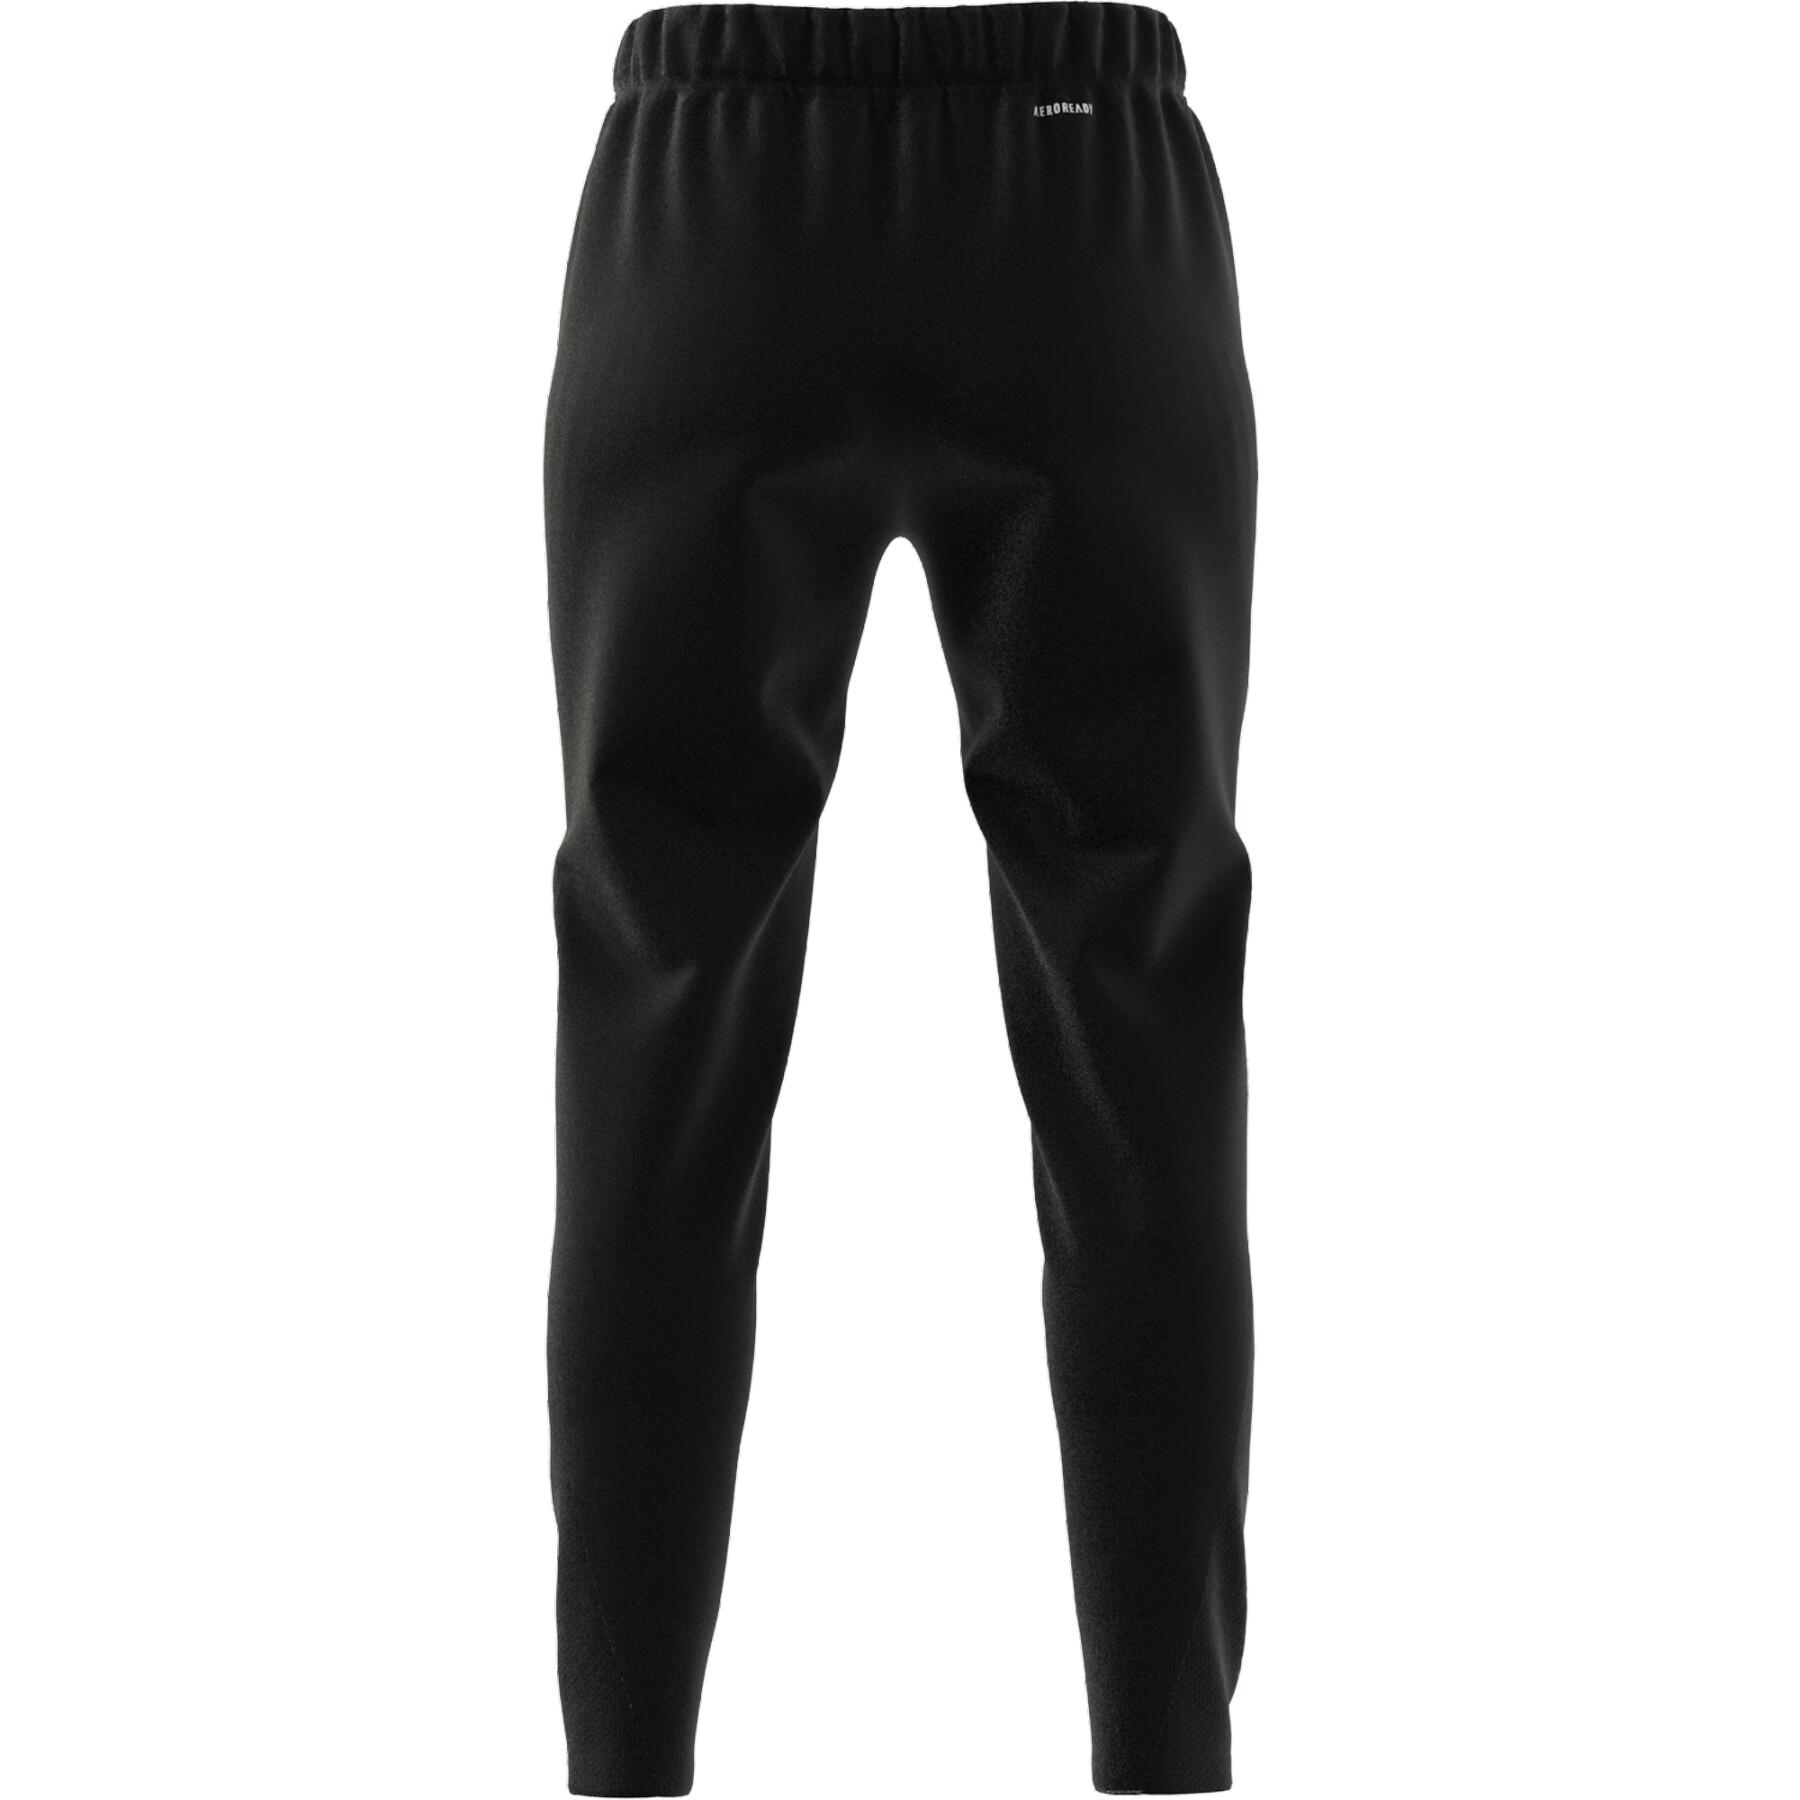 Women's trousers adidas Designed 2 Move Coton Touch